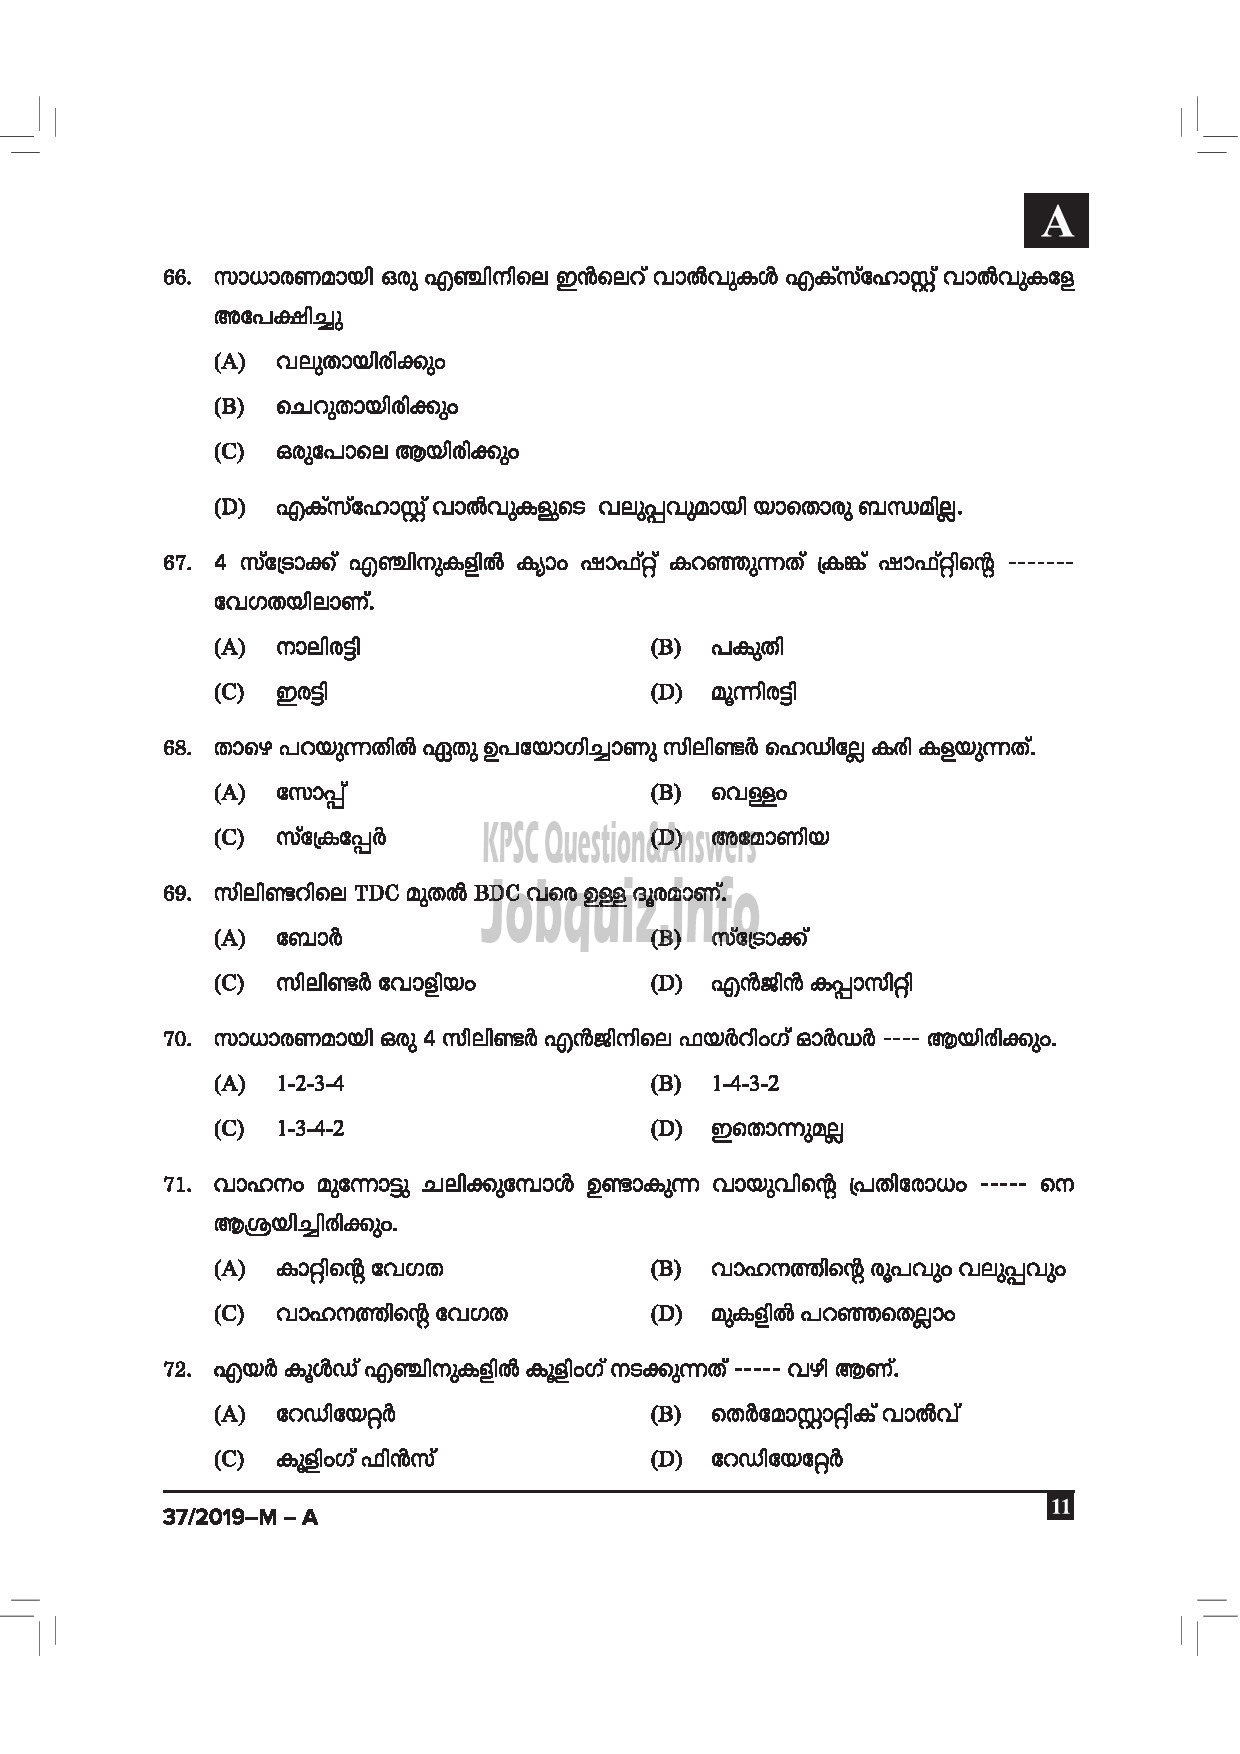 Kerala PSC Question Paper - DRIVER CUM OFFICE ATTENDANT / POLICE CONSTABLE DRIVER GOVT OWNED COMP / CORP / BOARD / POLICE MALAYALAM -11